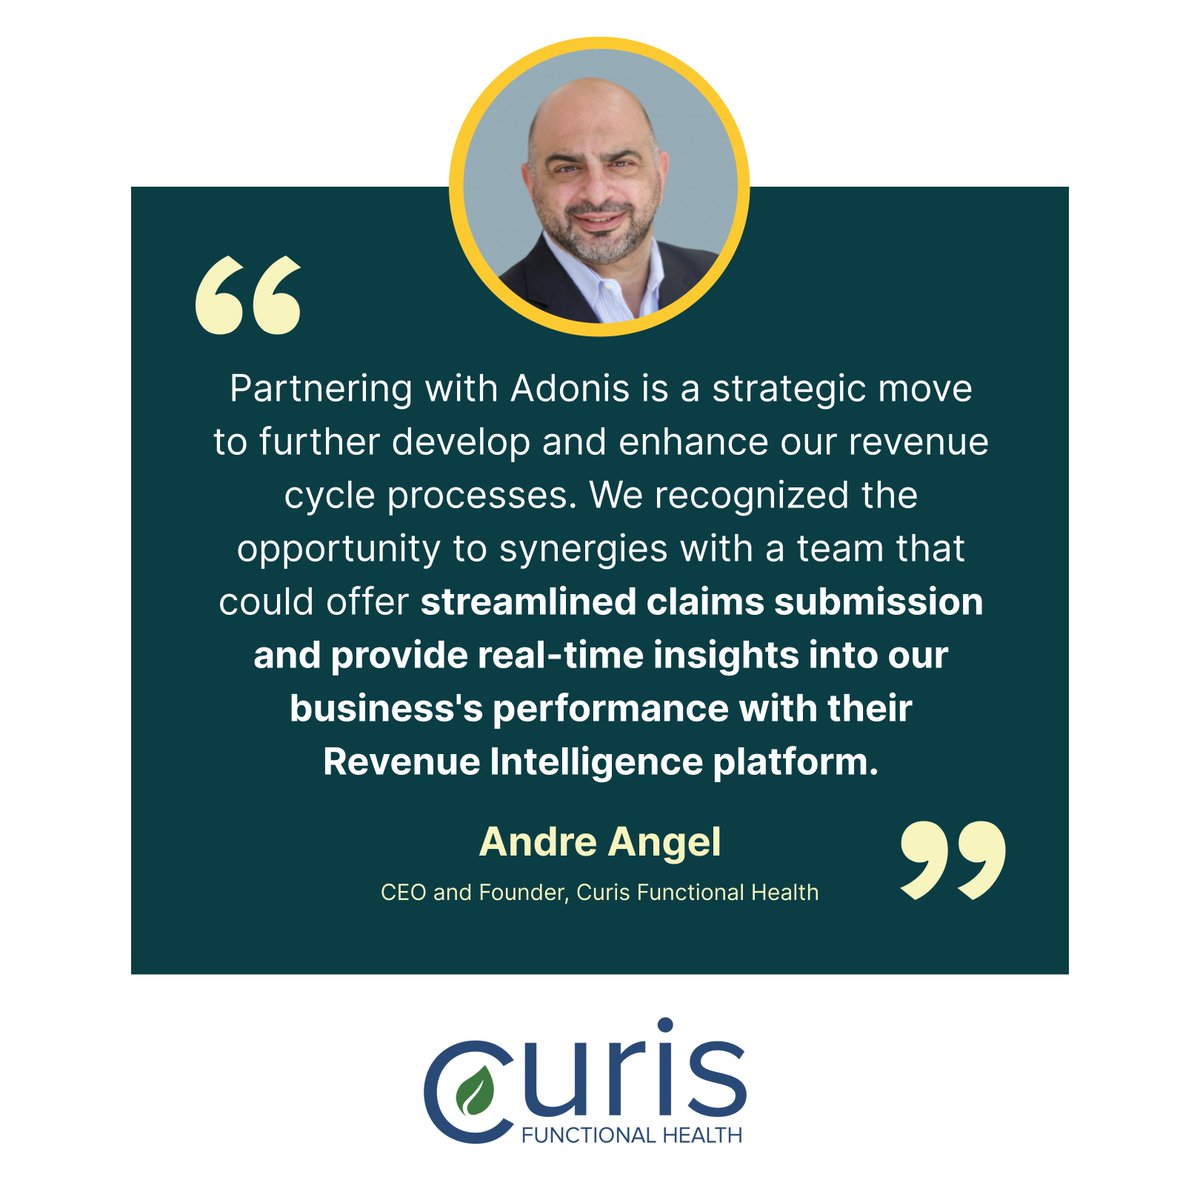 🚨There is no better feeling than receiving #positive feedback from our #customers...Here is another quick recap from our recent #partnership announcement with Curis Functional Health...